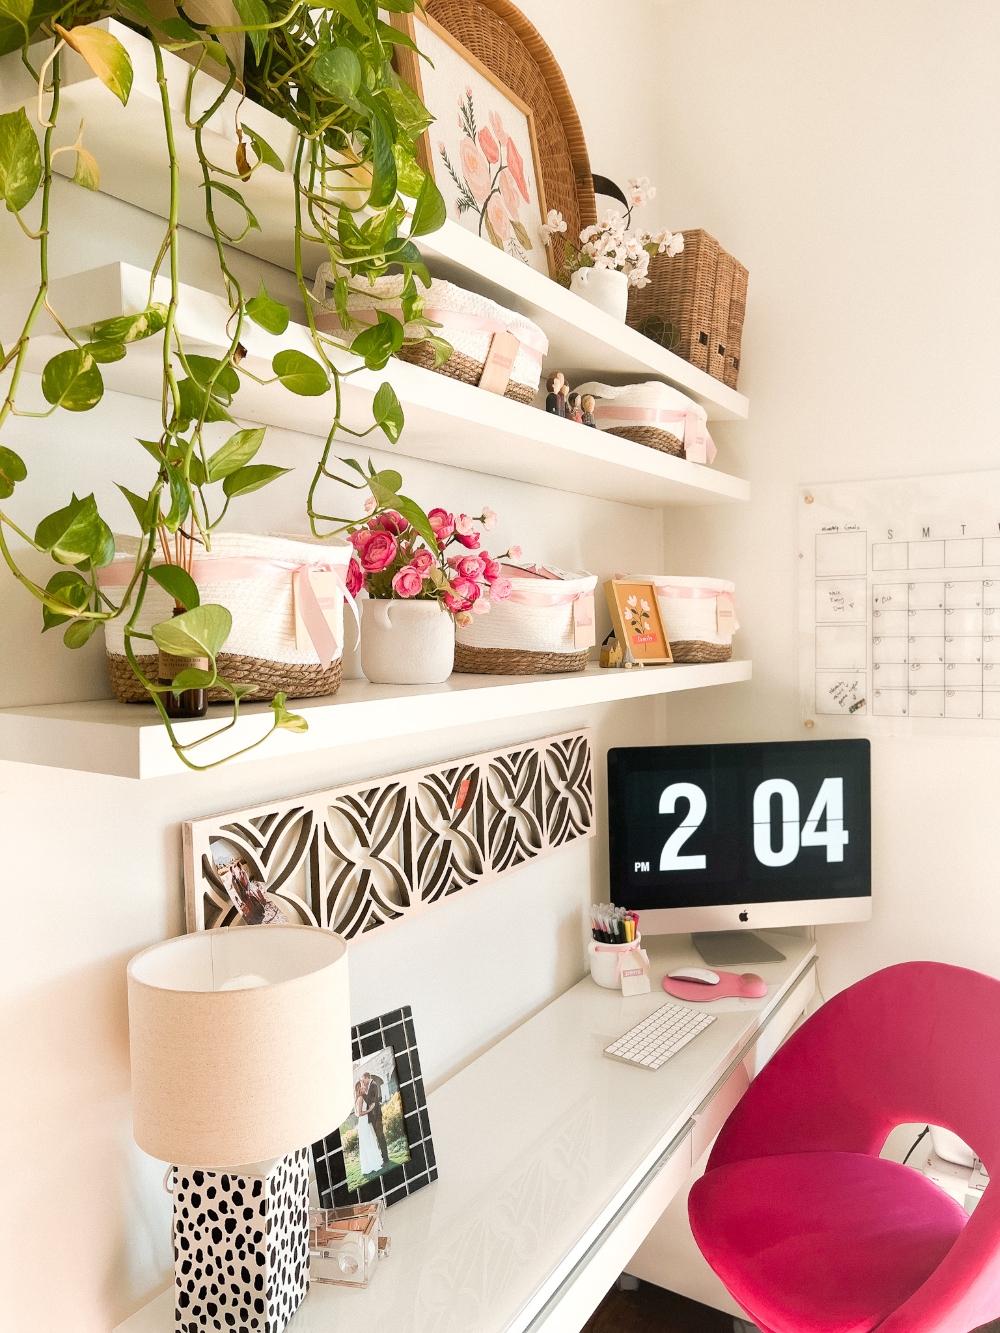 New Year Office Organizing! I organized my office nook with new baskets, tags and a bright and happy new look!